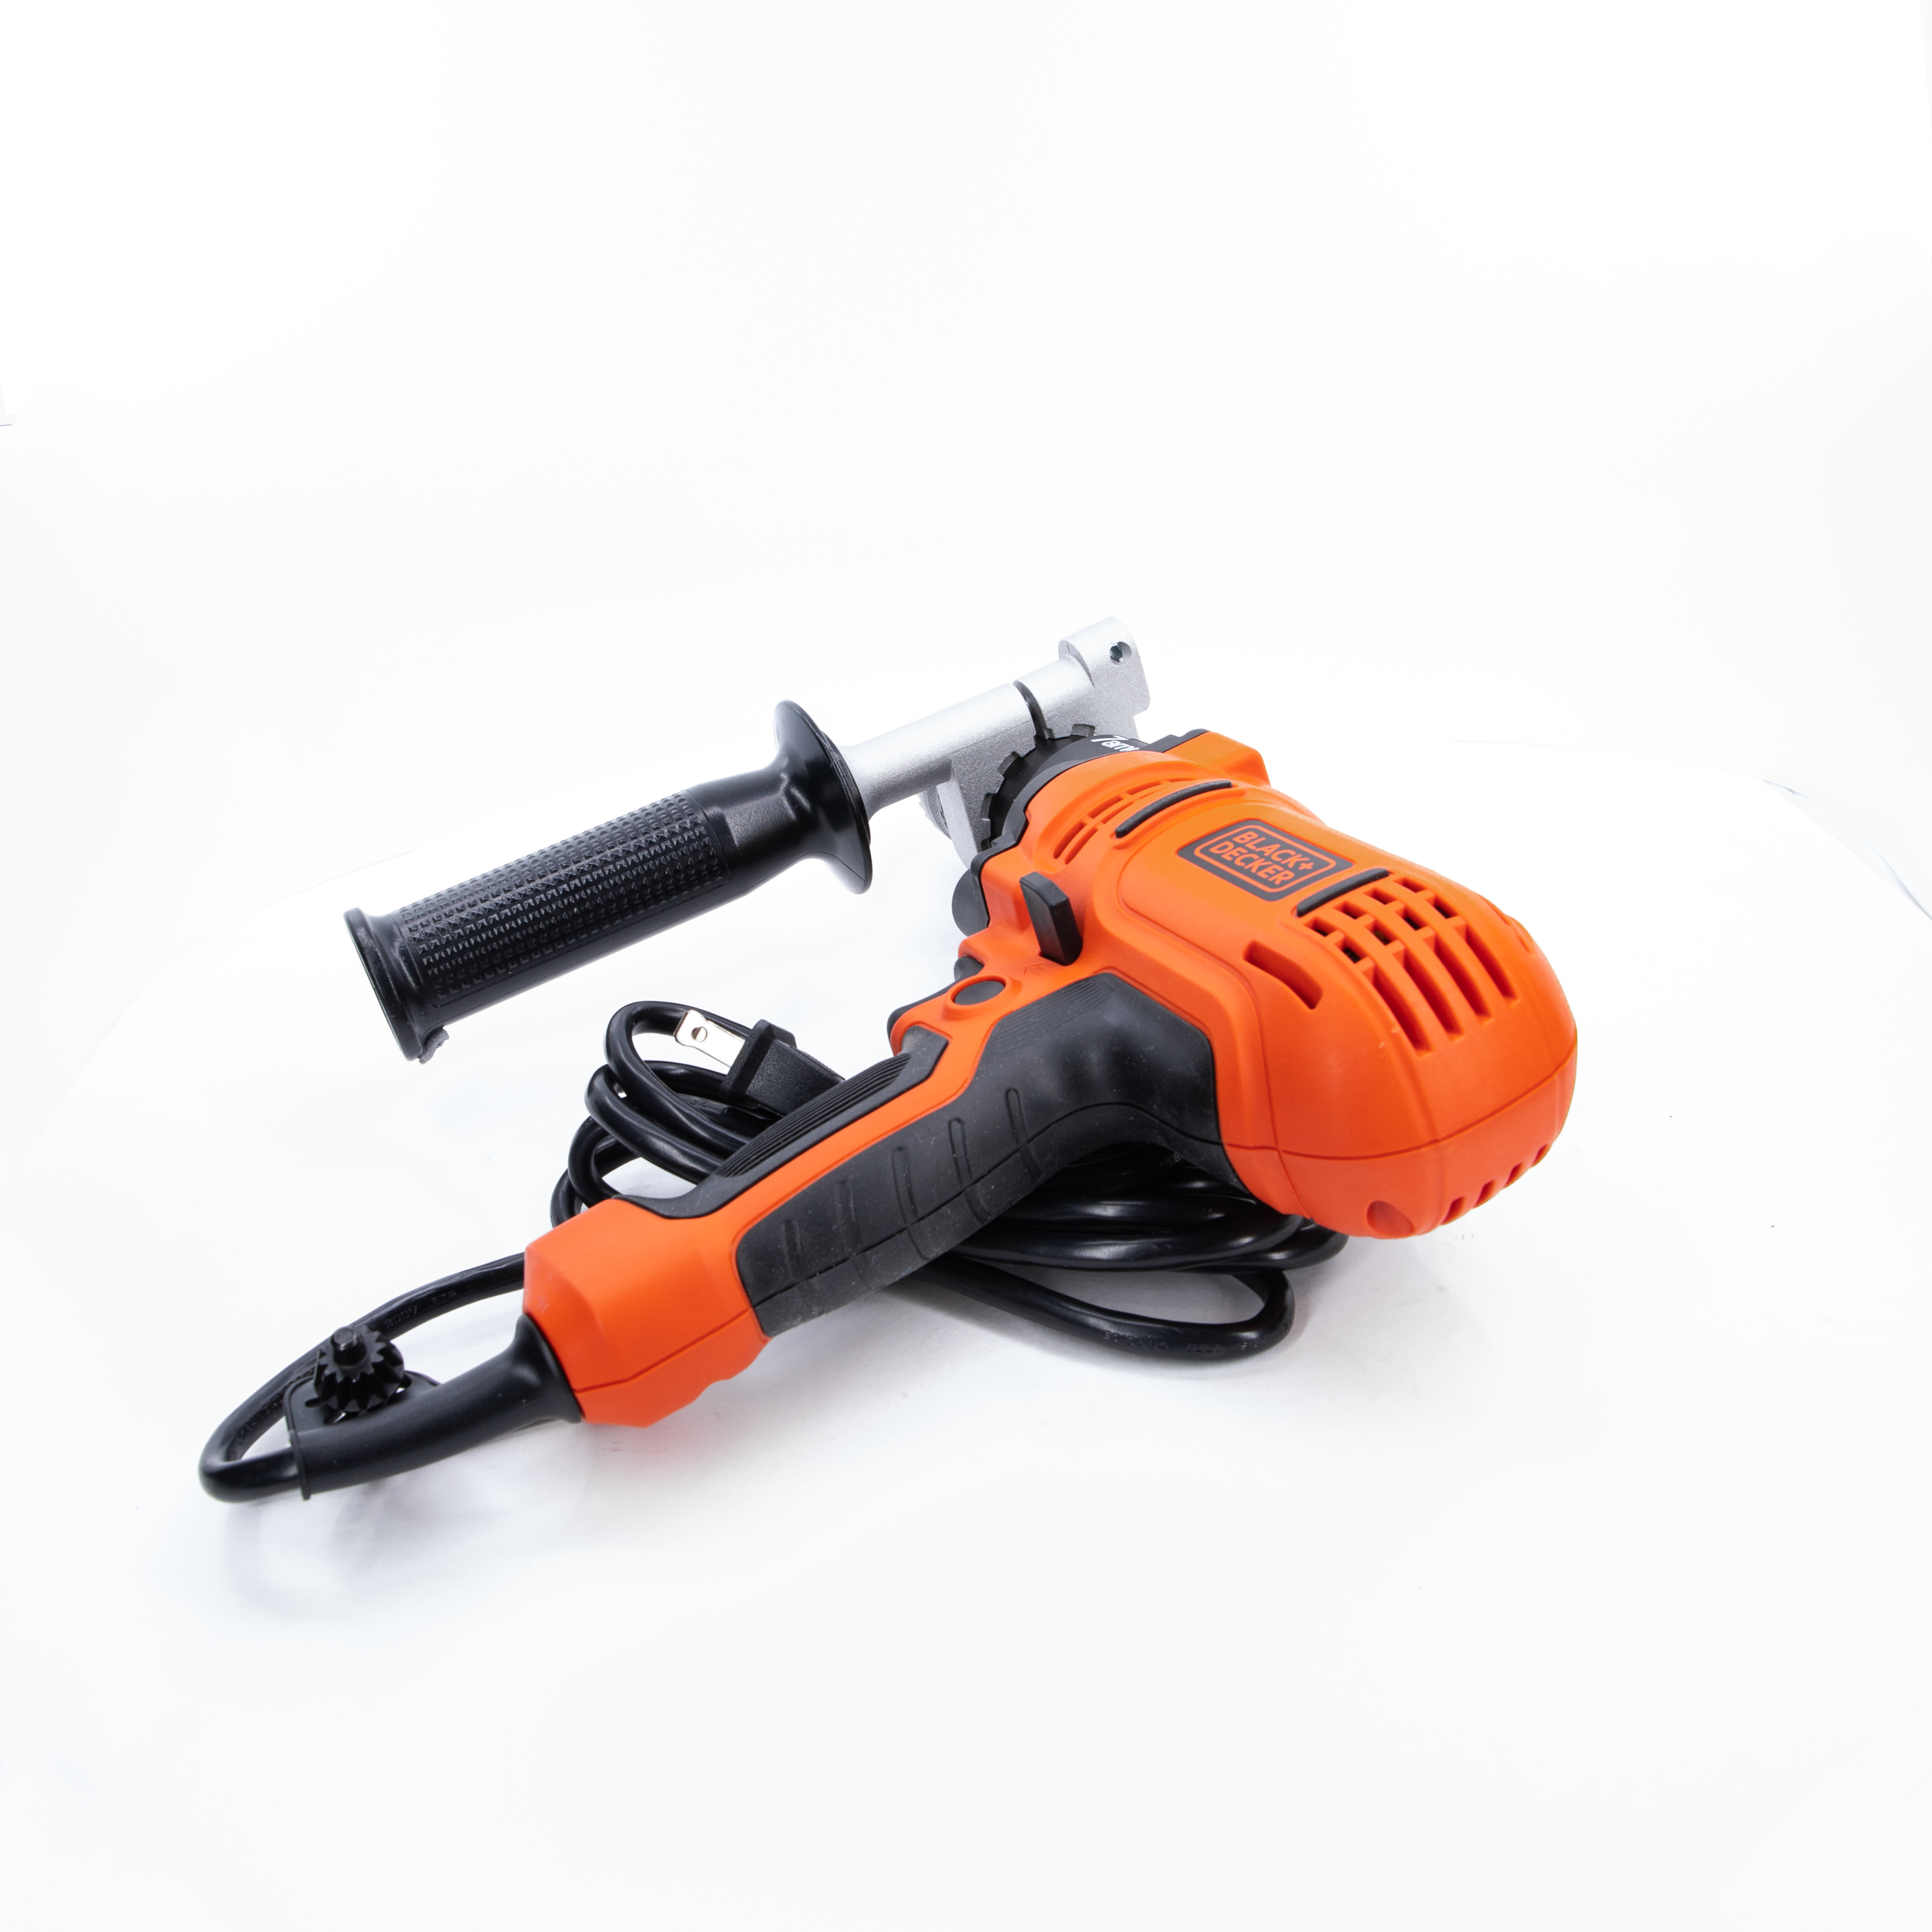  BLACK+DECKER 7.0 Amp 1/2 in. Electric Drill/Driver Kit (DR560)  : Everything Else